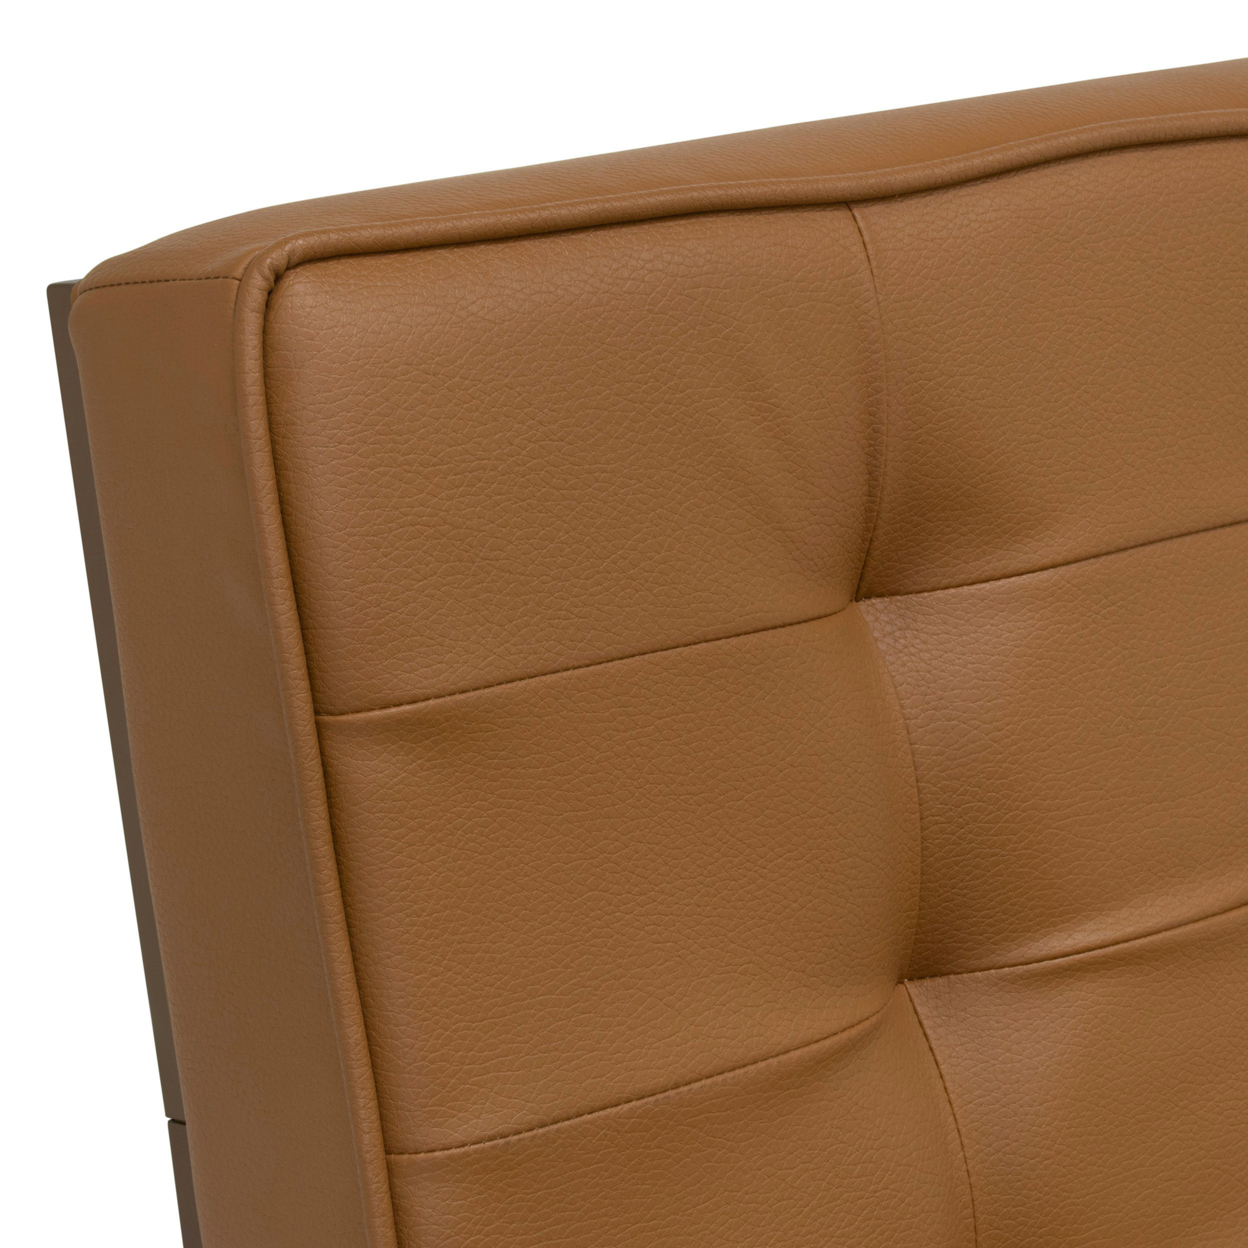 Studio Designs Home Ashlar Plush Tufted Bonded Leather Accent Chair with Woven Webbing Seat - Bronze/Caramel - image 3 of 7